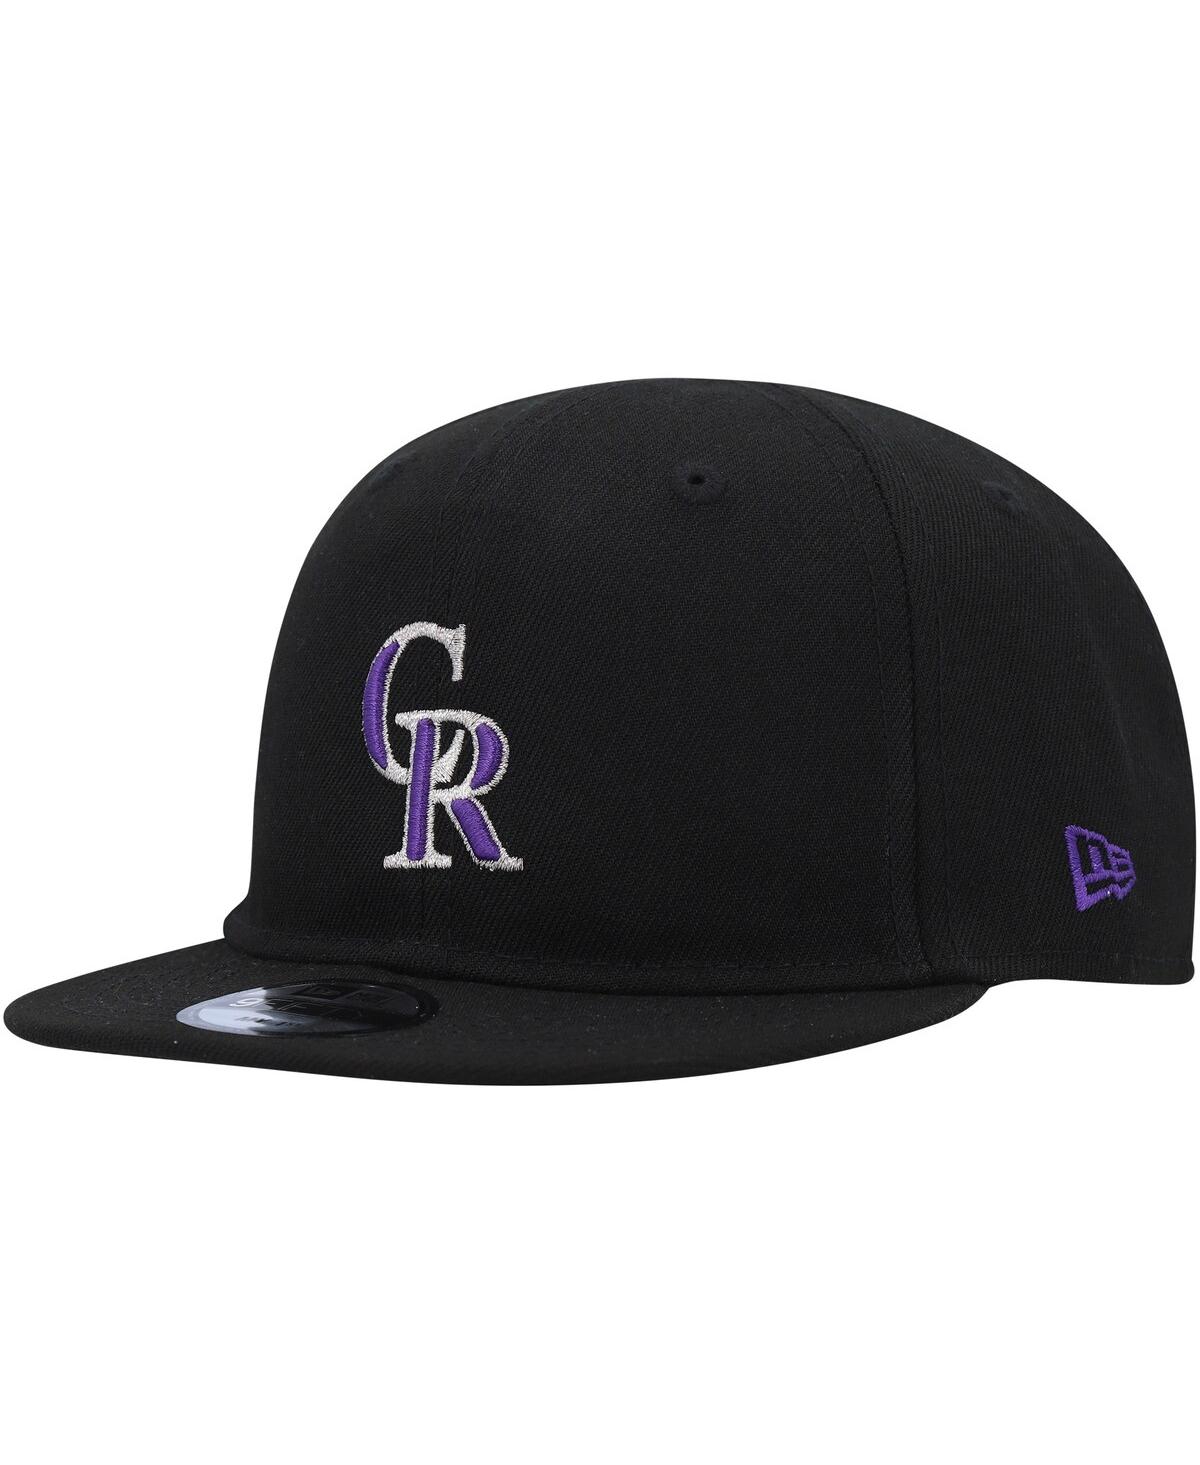 New Era Babies' Infant Boys And Girls  Black Colorado Rockies My First 9fifty Adjustable Hat